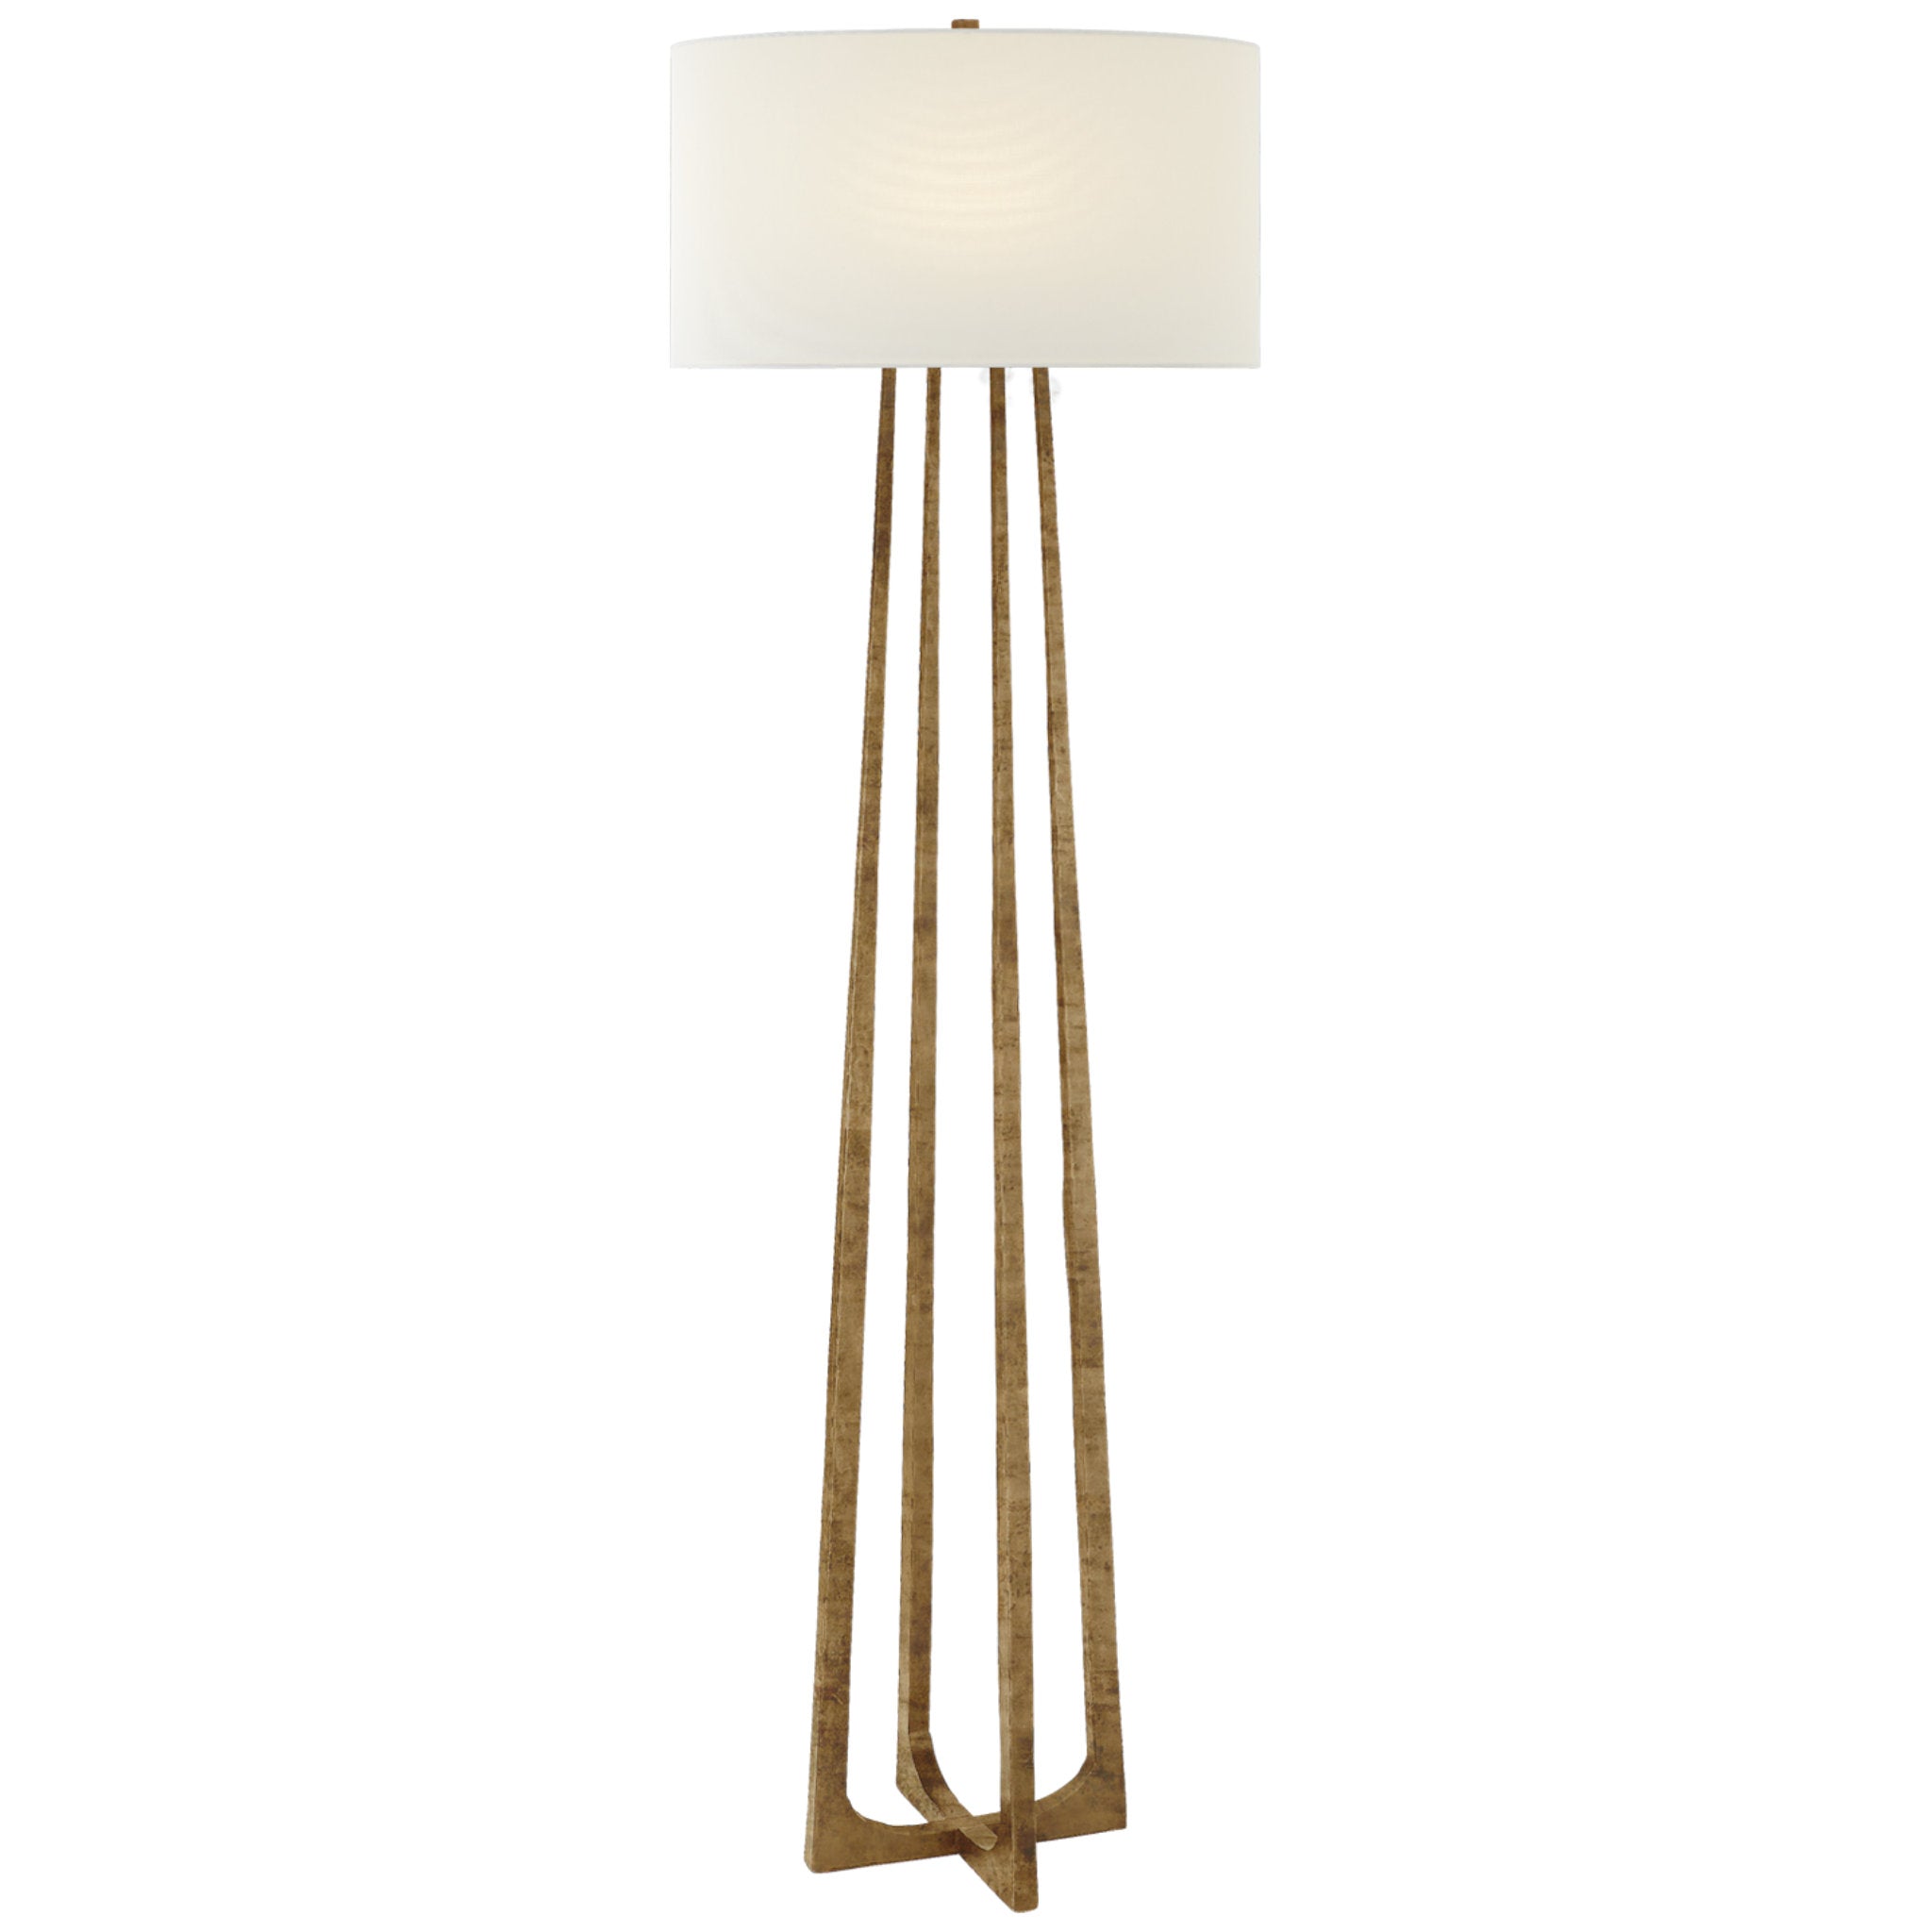 Ian K. Fowler Scala Large Hand-Forged Floor Lamp in Gilded Iron with Linen Shade